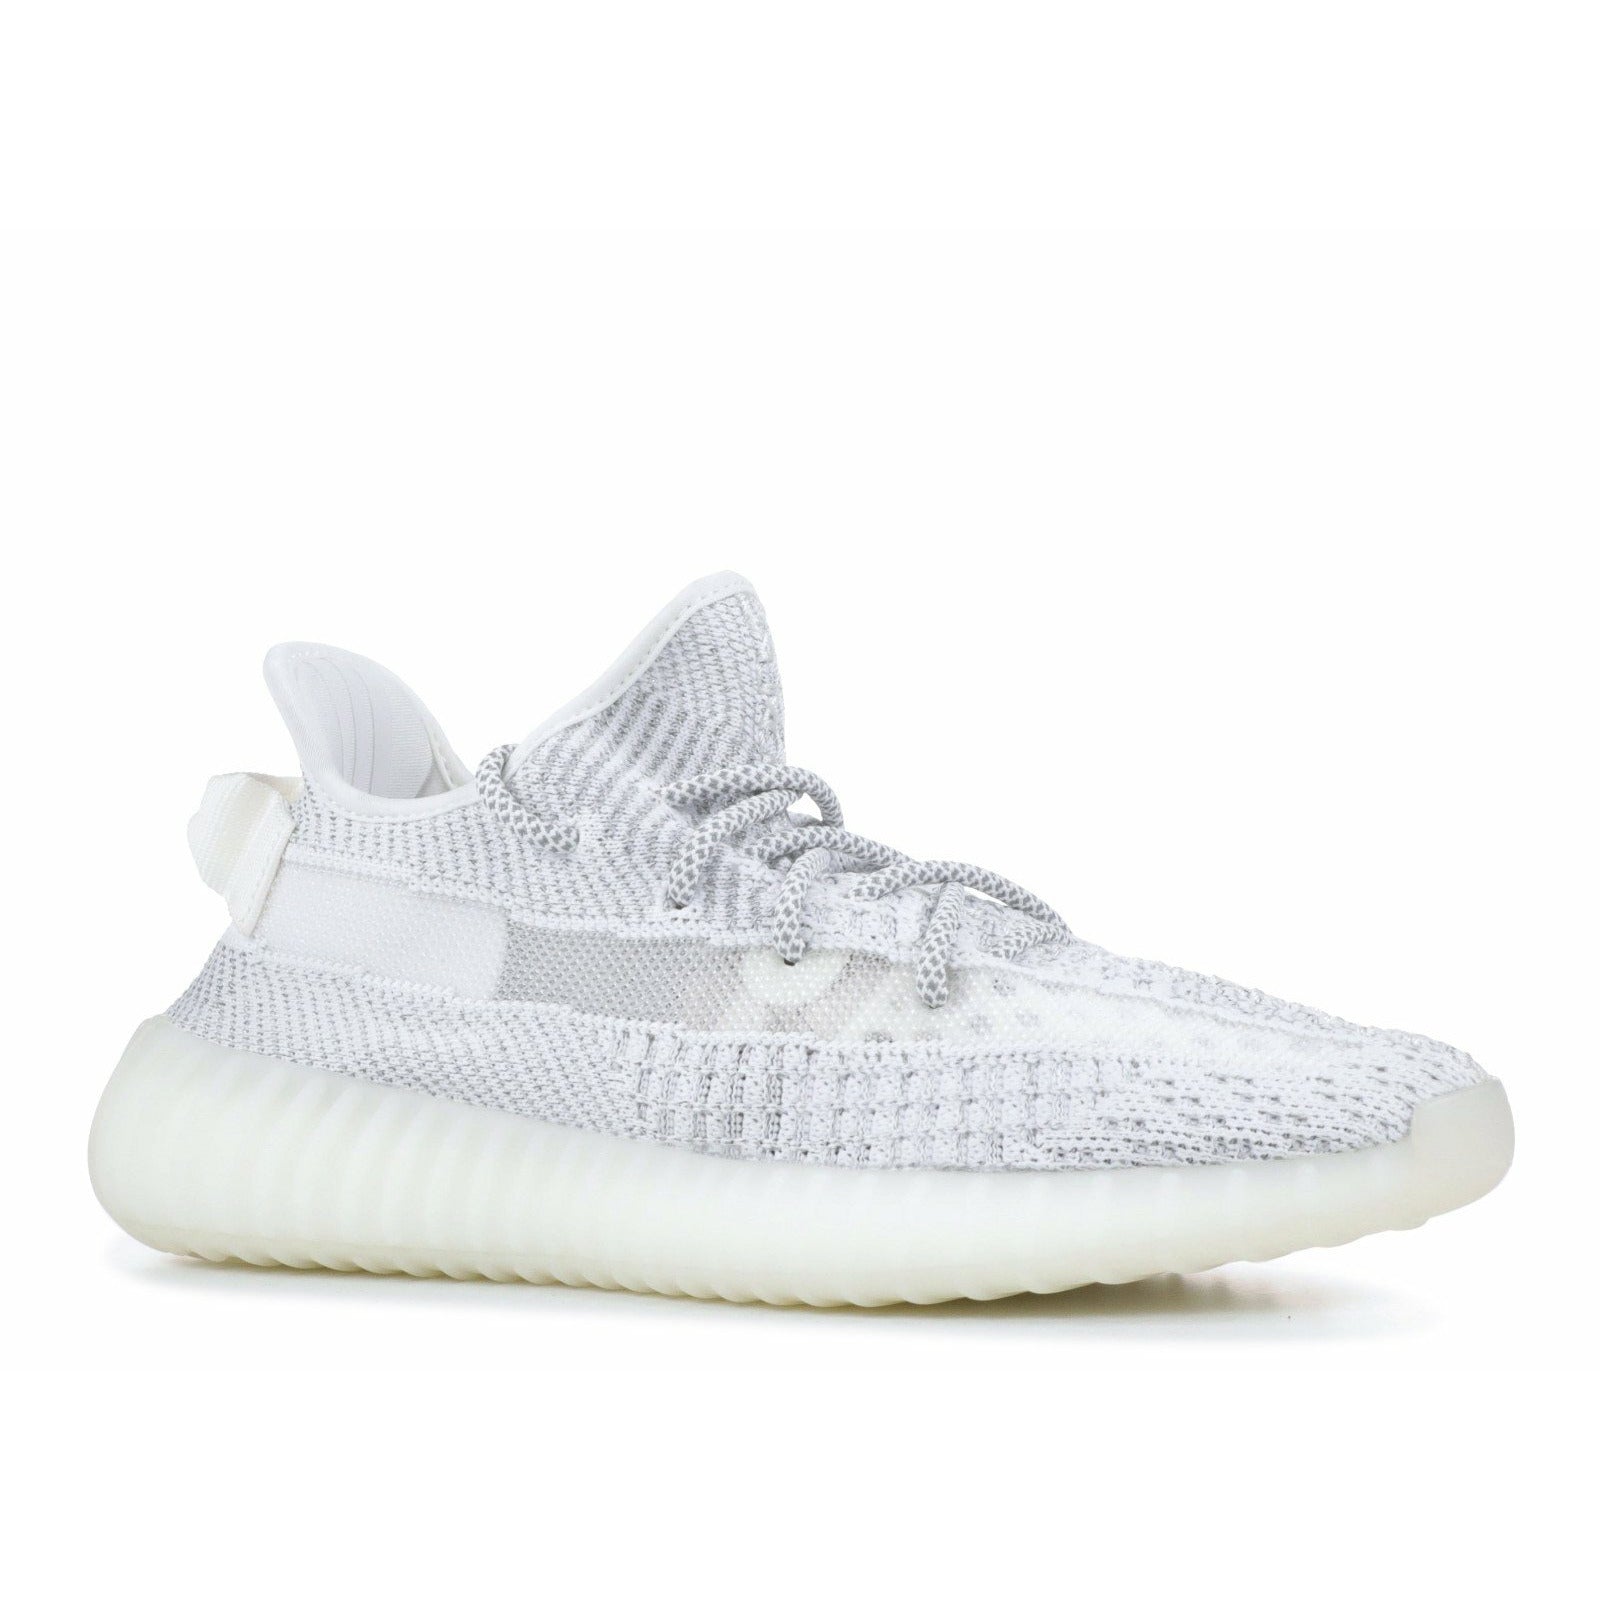 Adidas-Yeezy Boost 350 V2 "Static" Reflective-Adidas Yeezy Boost 350 V2 "Static‰۝ Reflective Sneakers
Product code: EF2367 Colour: Static/Static/Static Year of release: 2019
| MrSneaker is Europe's number 1 exclusive sneaker store.-mrsneaker